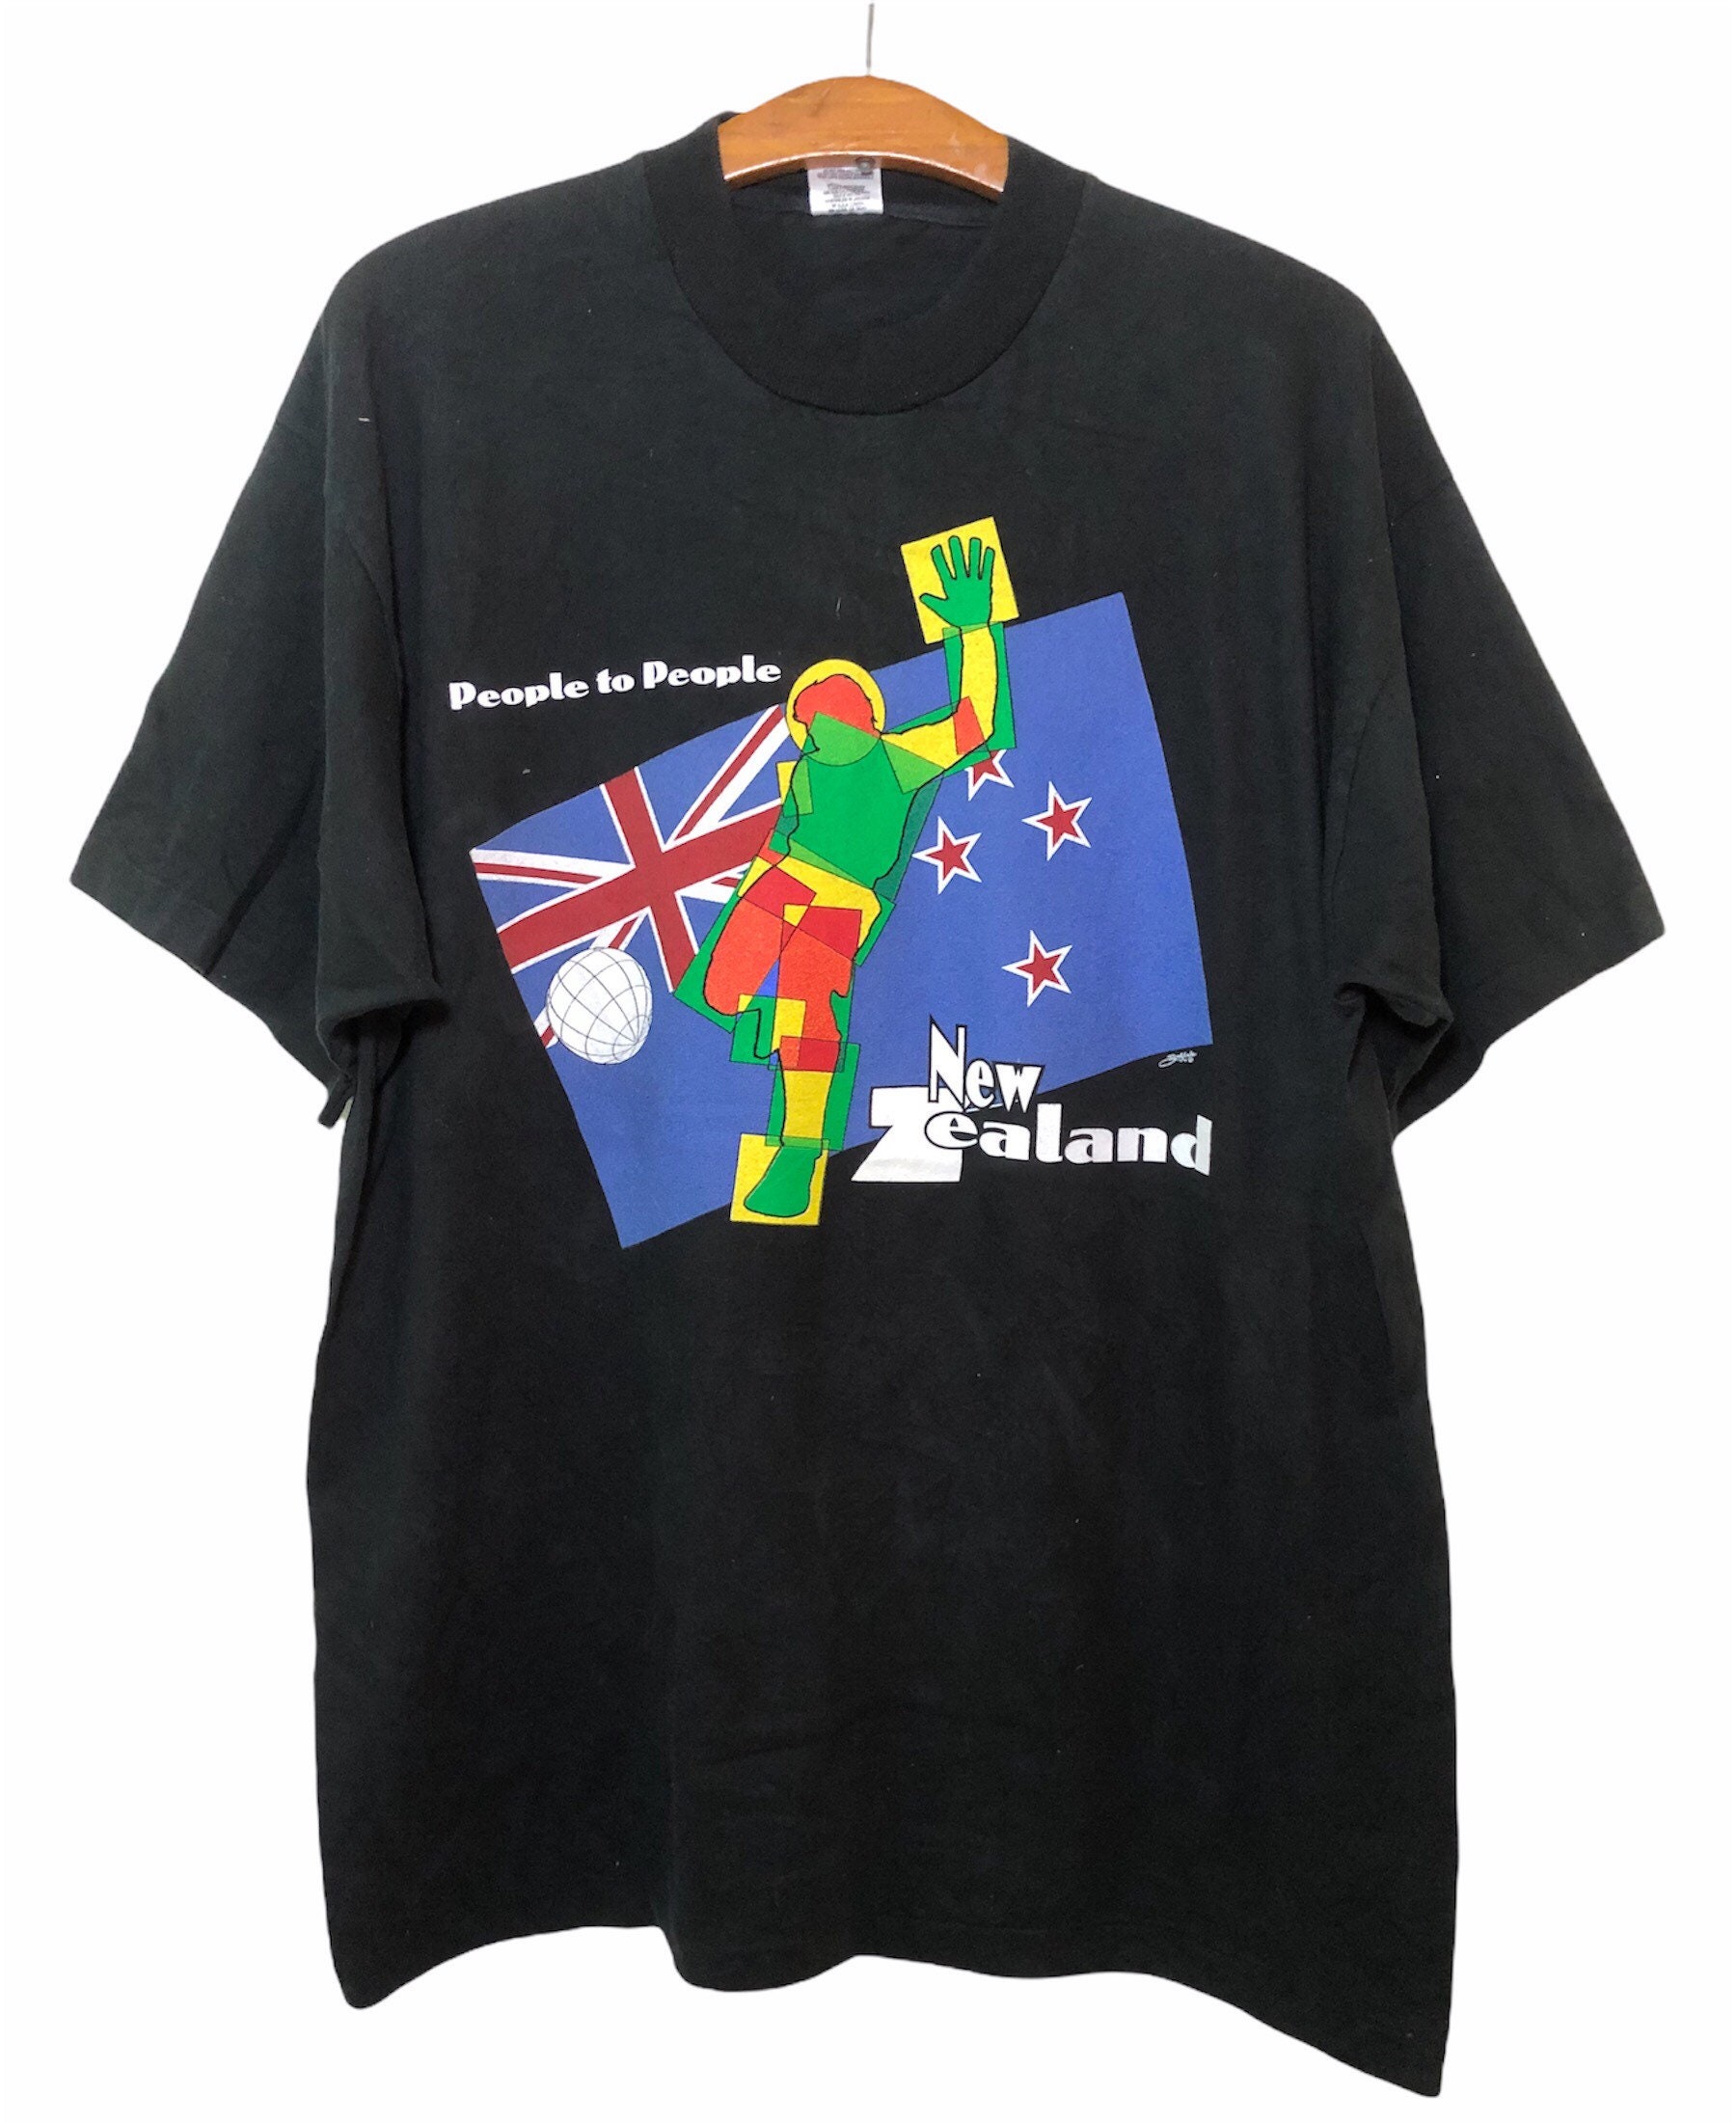 Vintage 90s People to People New Zealand Art T Shirt XL Size